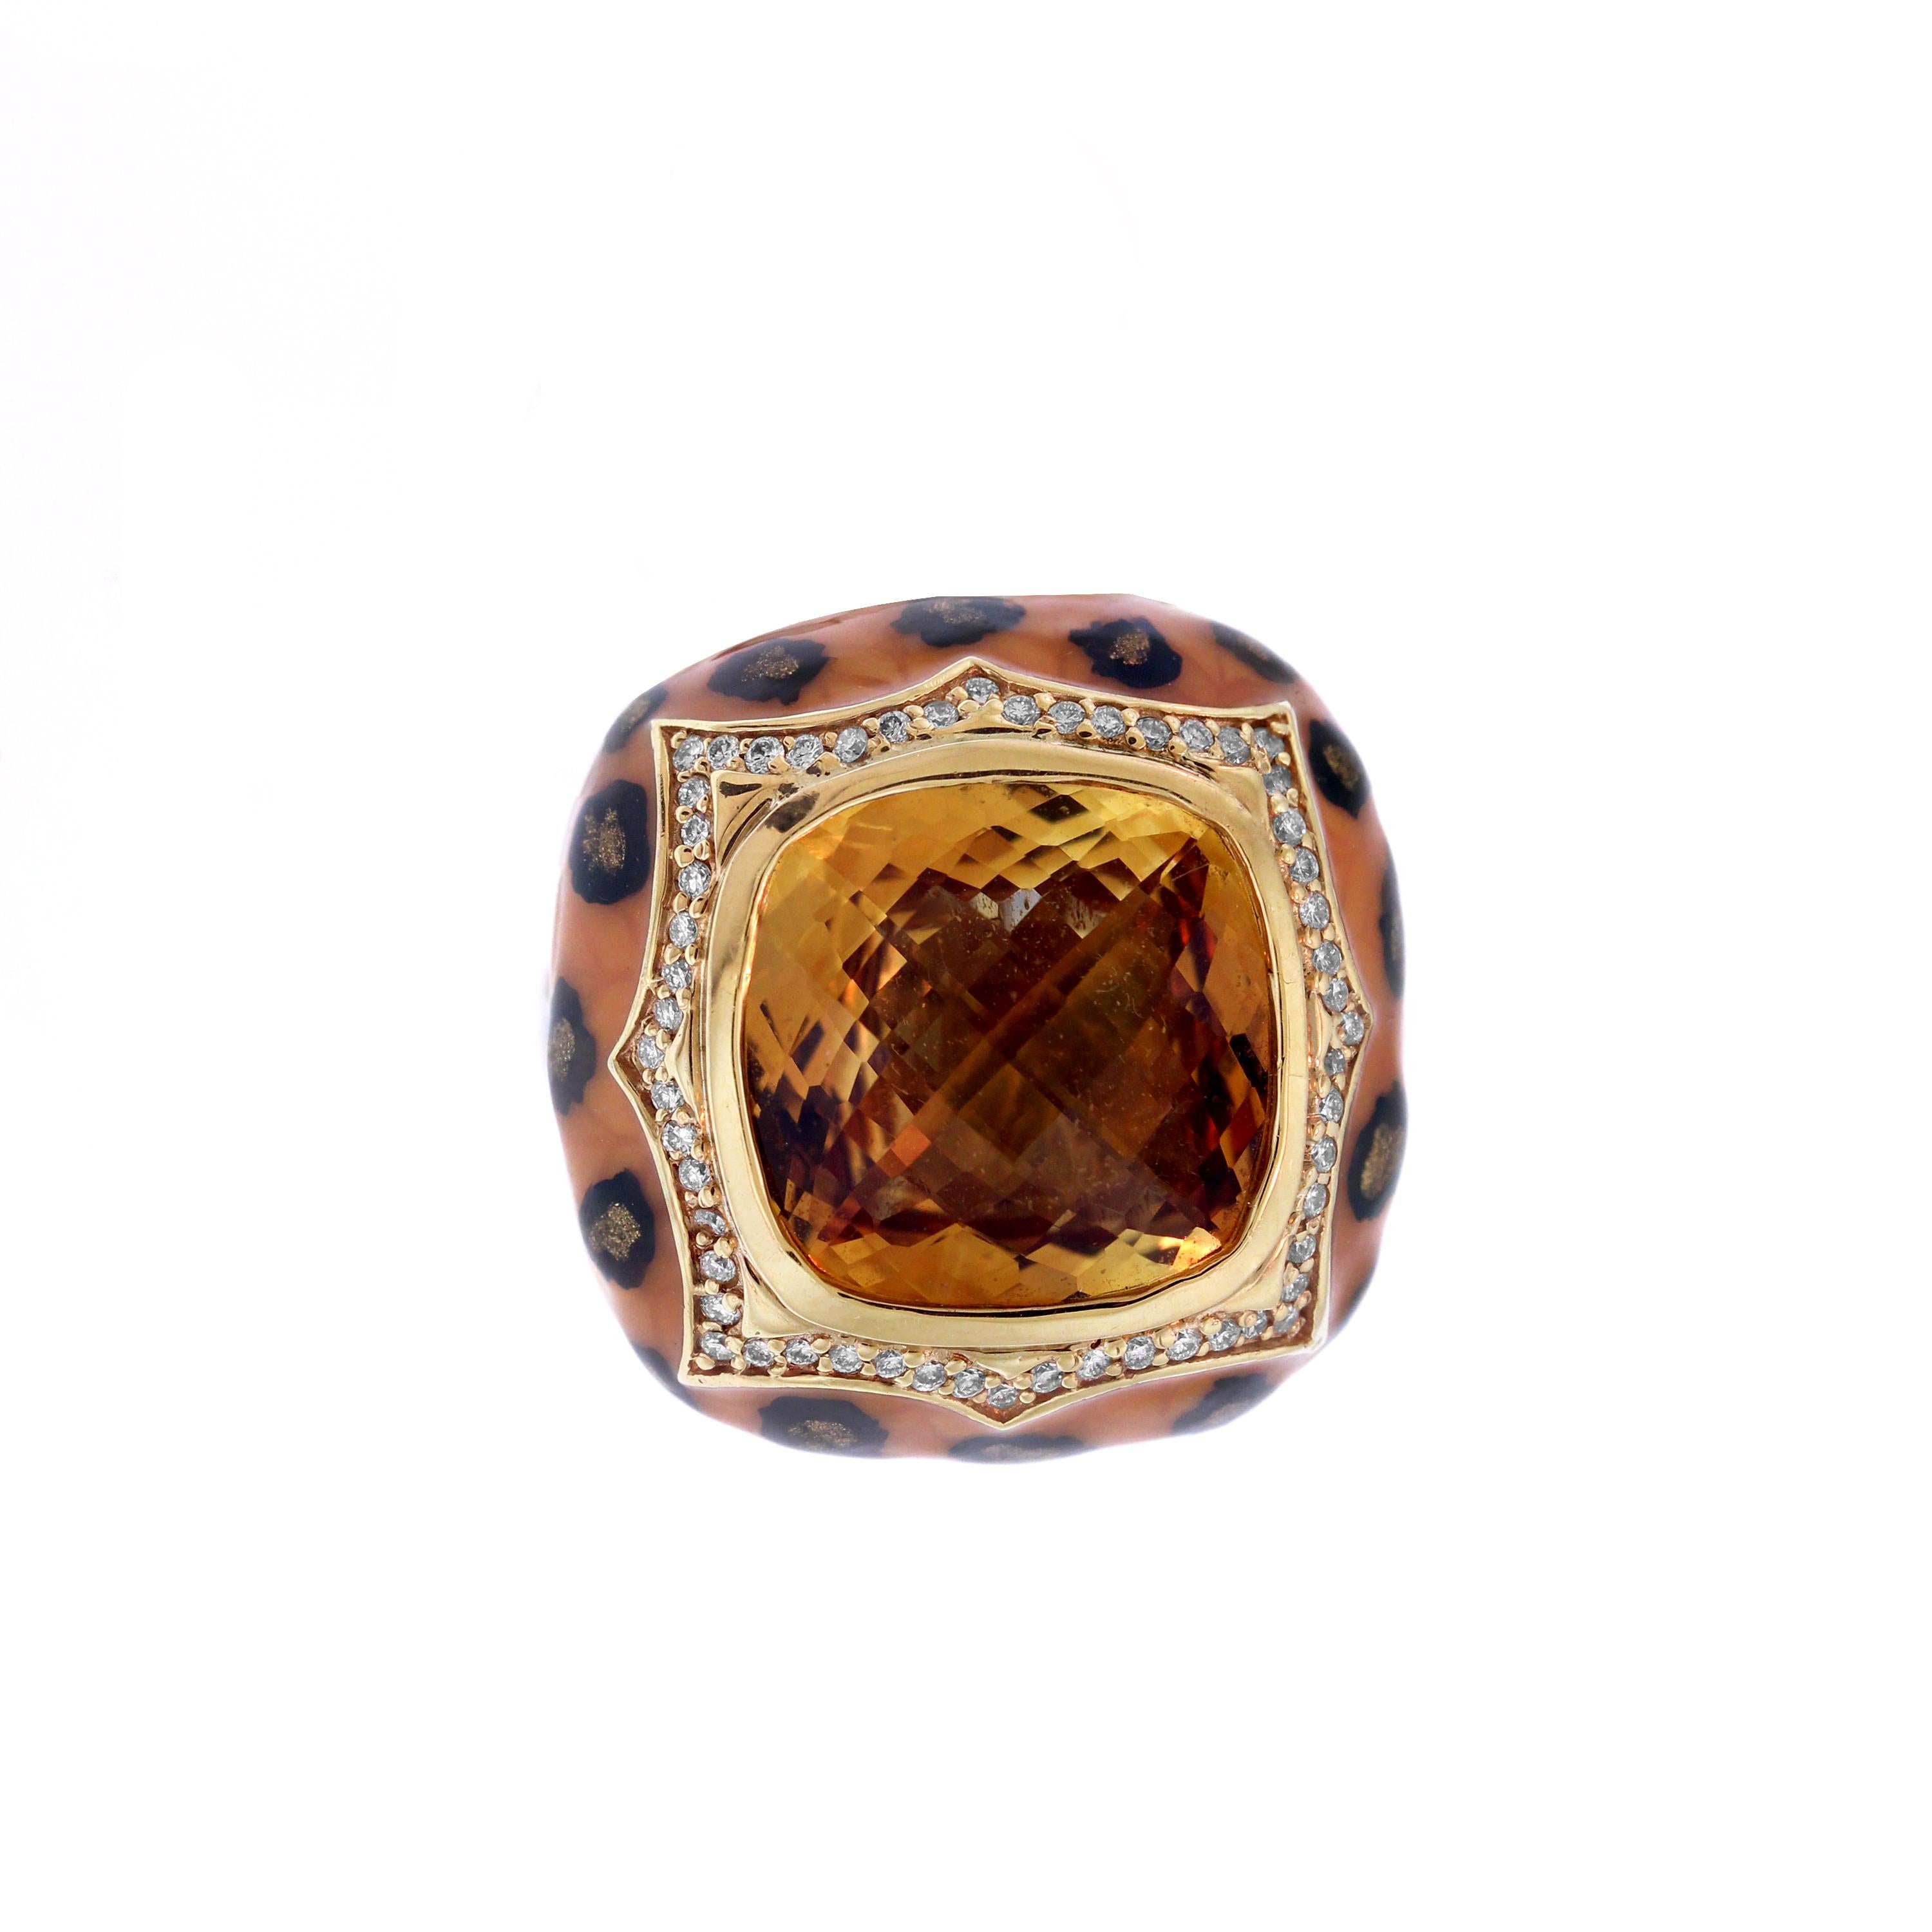 IF YOU ARE REALLY INTERESTED, CONTACT US WITH ANY REASONABLE OFFER. WE WILL TRY OUR BEST TO MAKE YOU HAPPY!

18K Yellow Gold and Diamond Ring with Citrine Center and Orange/Black Enamel

Truly incredible enamel work seen on this ring done in orange